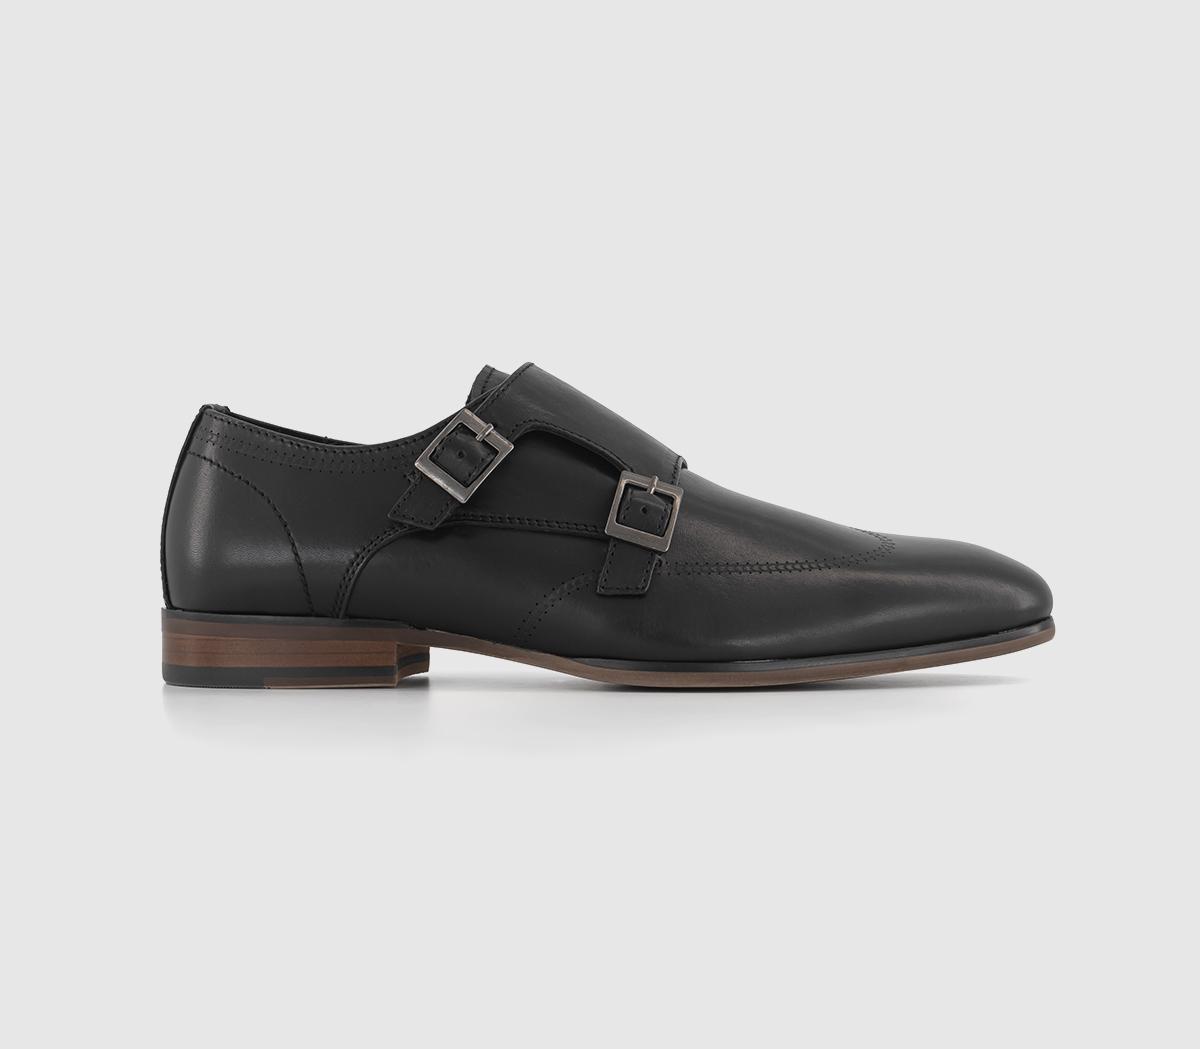 Marseille Leather Double Strap Monk Shoes Black Leather